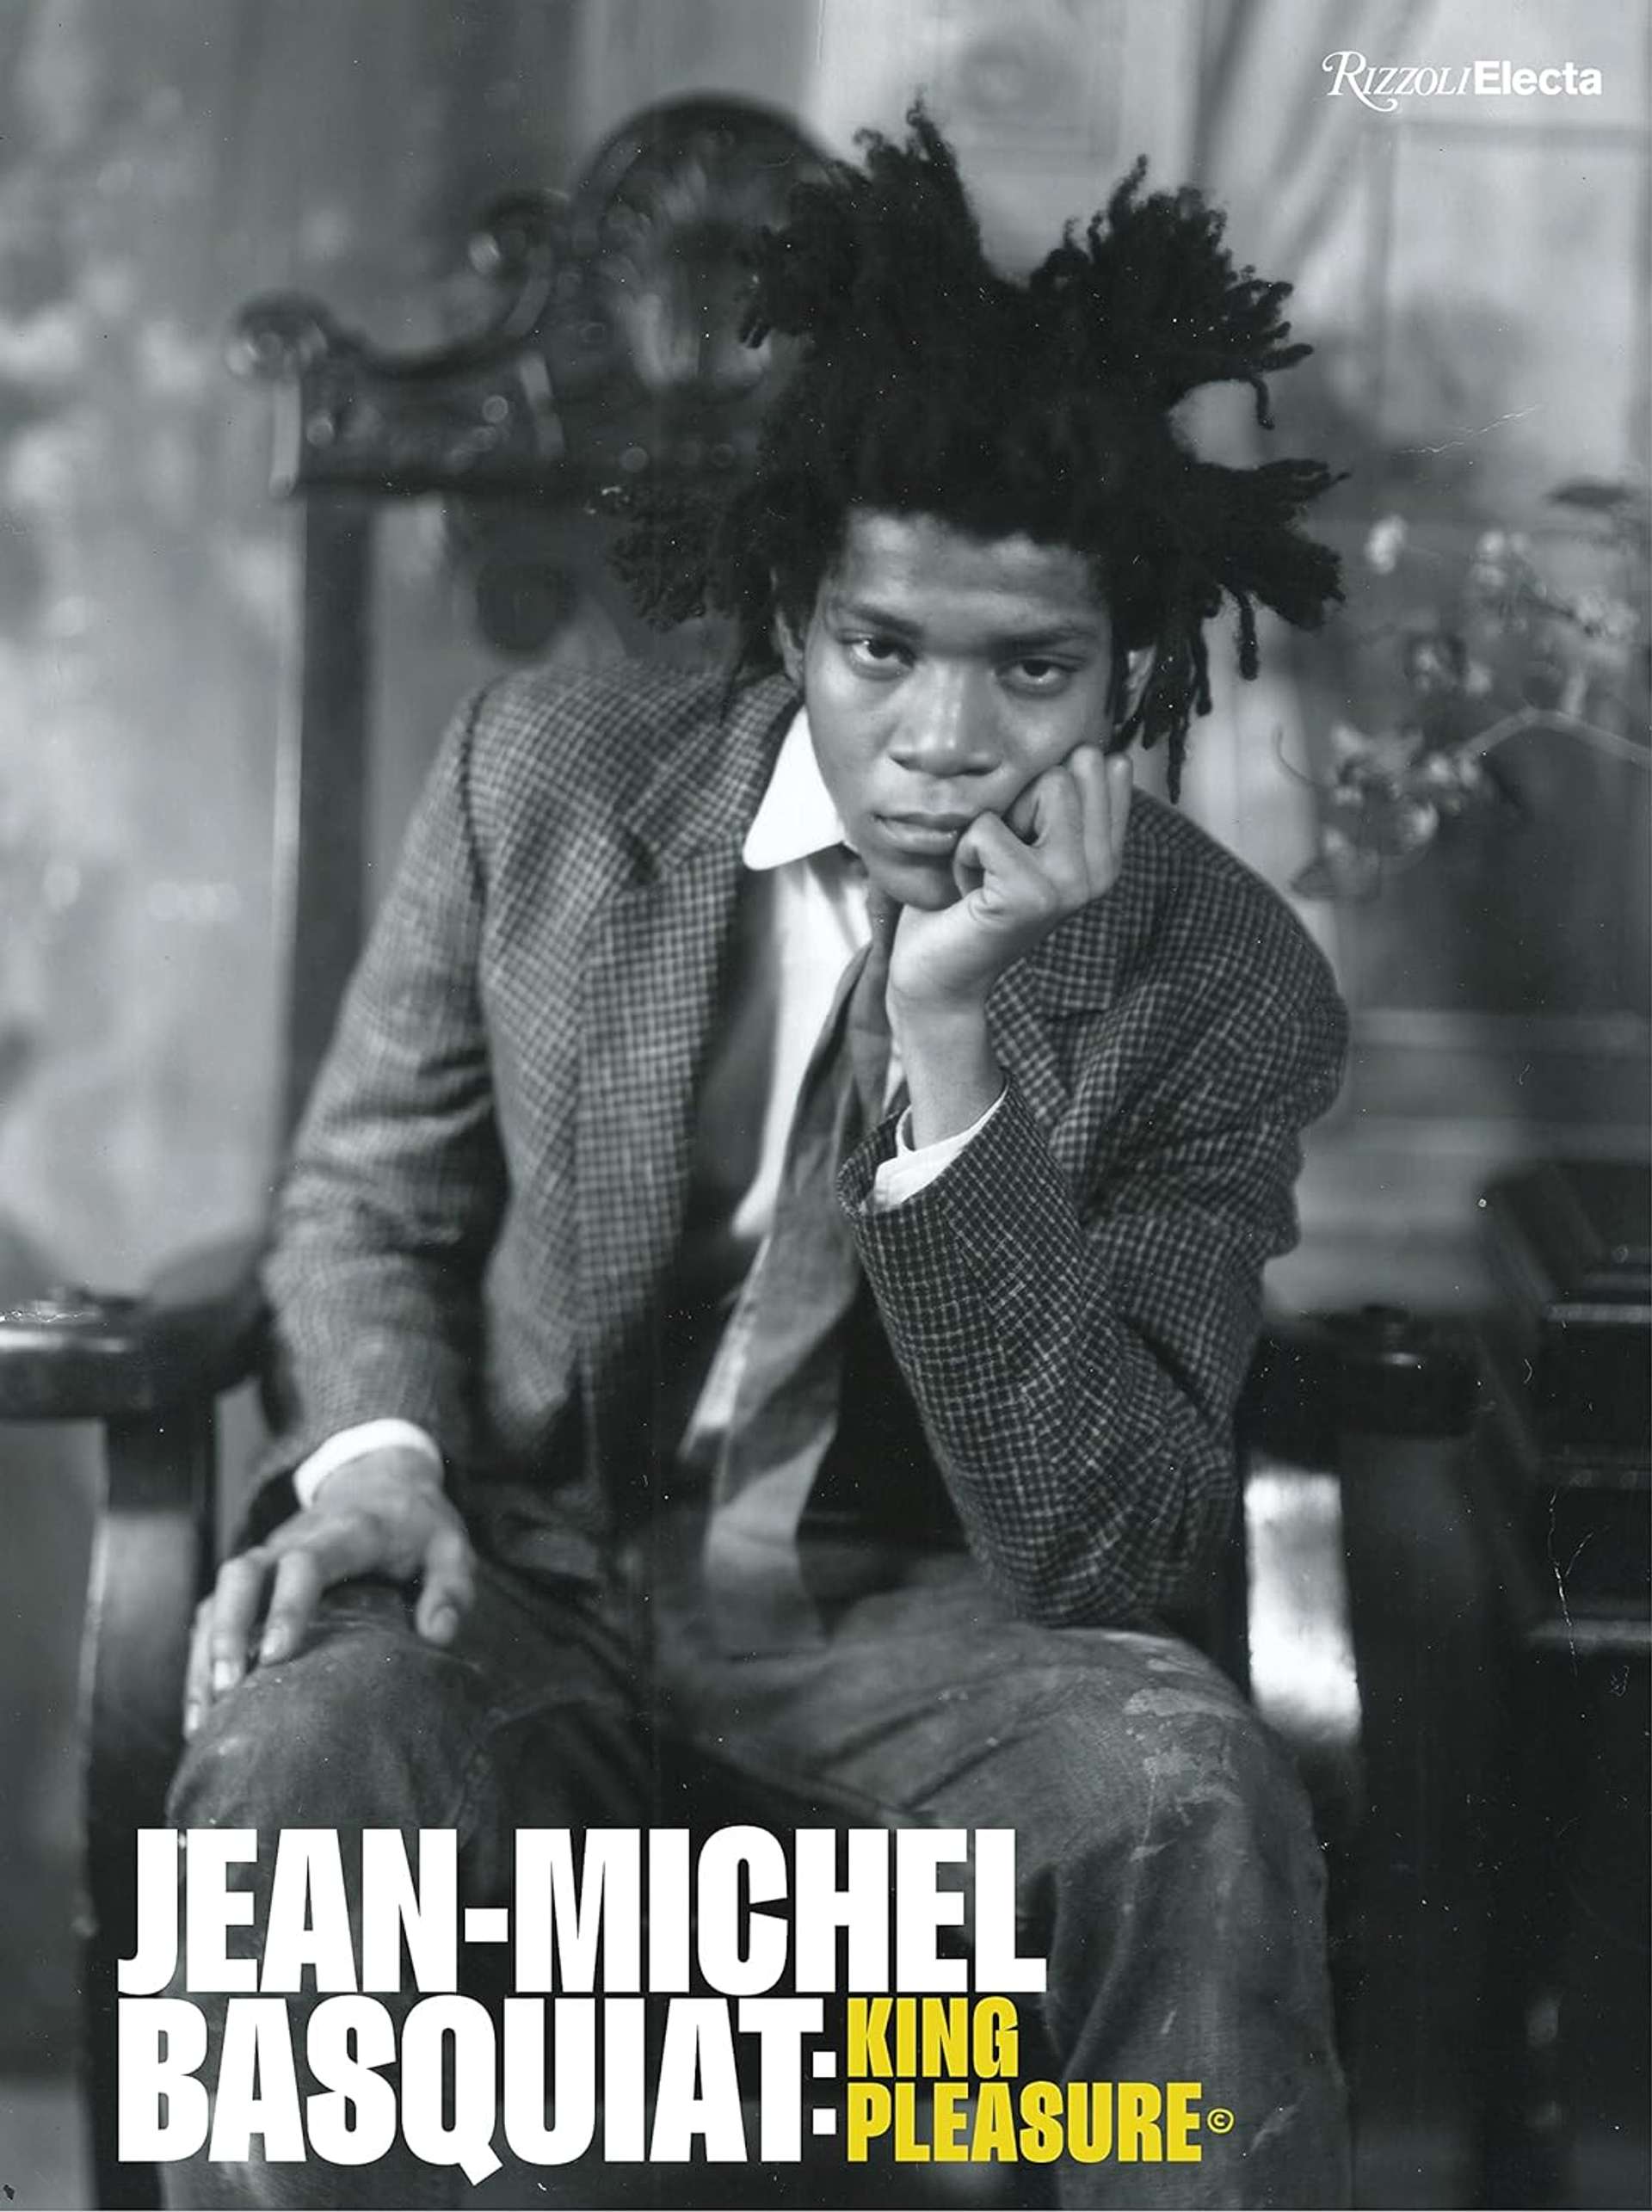 The book cover of the exhibition catalogue for Jean-Michel Basquiat: King Pleasure - featuring a black and white photograph of Basquiat in a suit